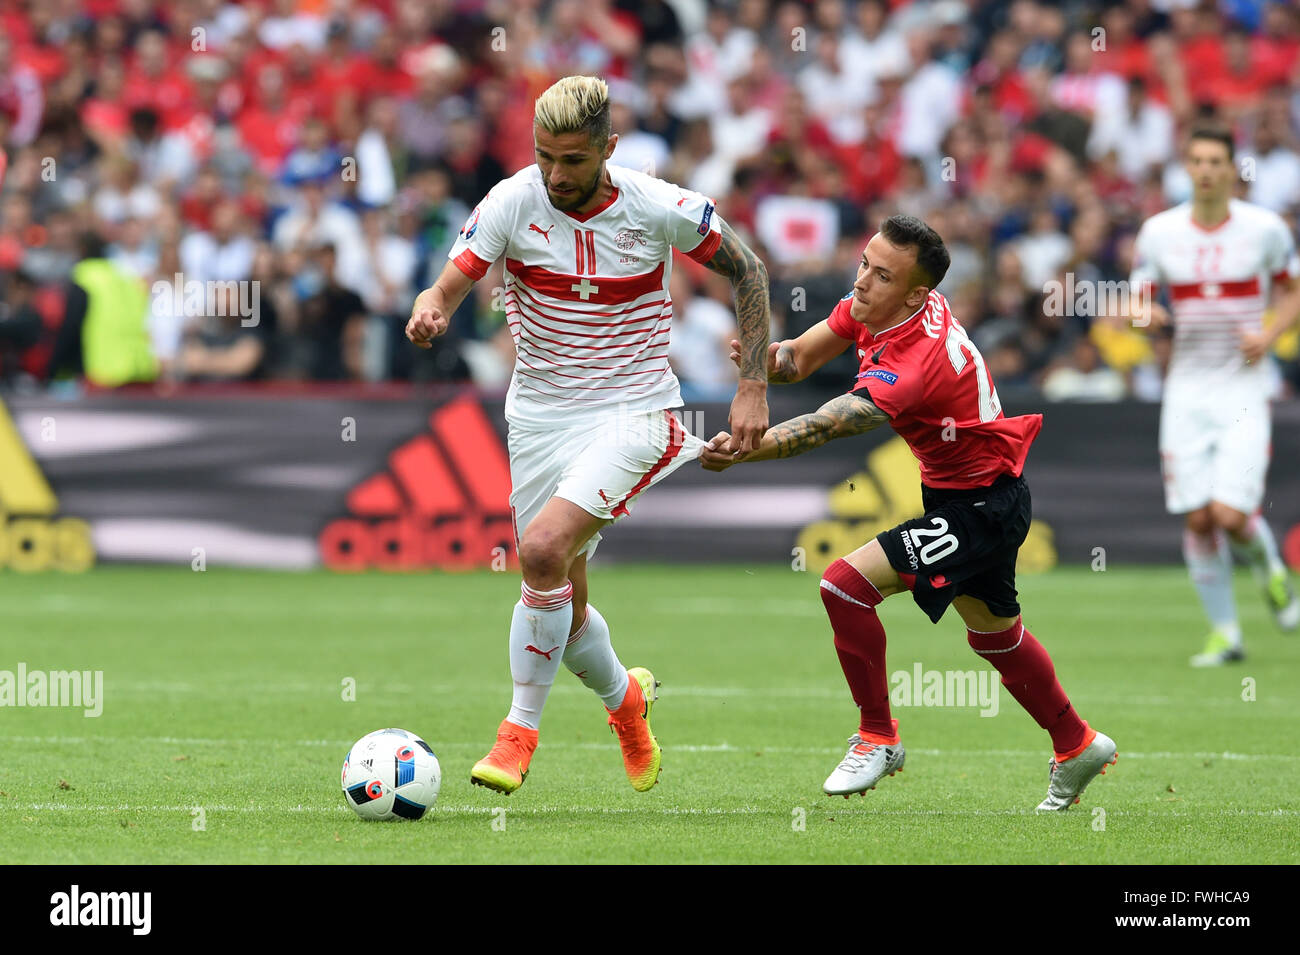 Lens, France. 11th June, 2016. Valon Behrami (SUI), Ergas Kace (ALB) Football/Soccer : UEFA EURO 2016 Group A match between Albania 0-1 Switzerland at Stade Bollaert-Delelis in Lens, France . © aicfoto/AFLO/Alamy Live News Stock Photo